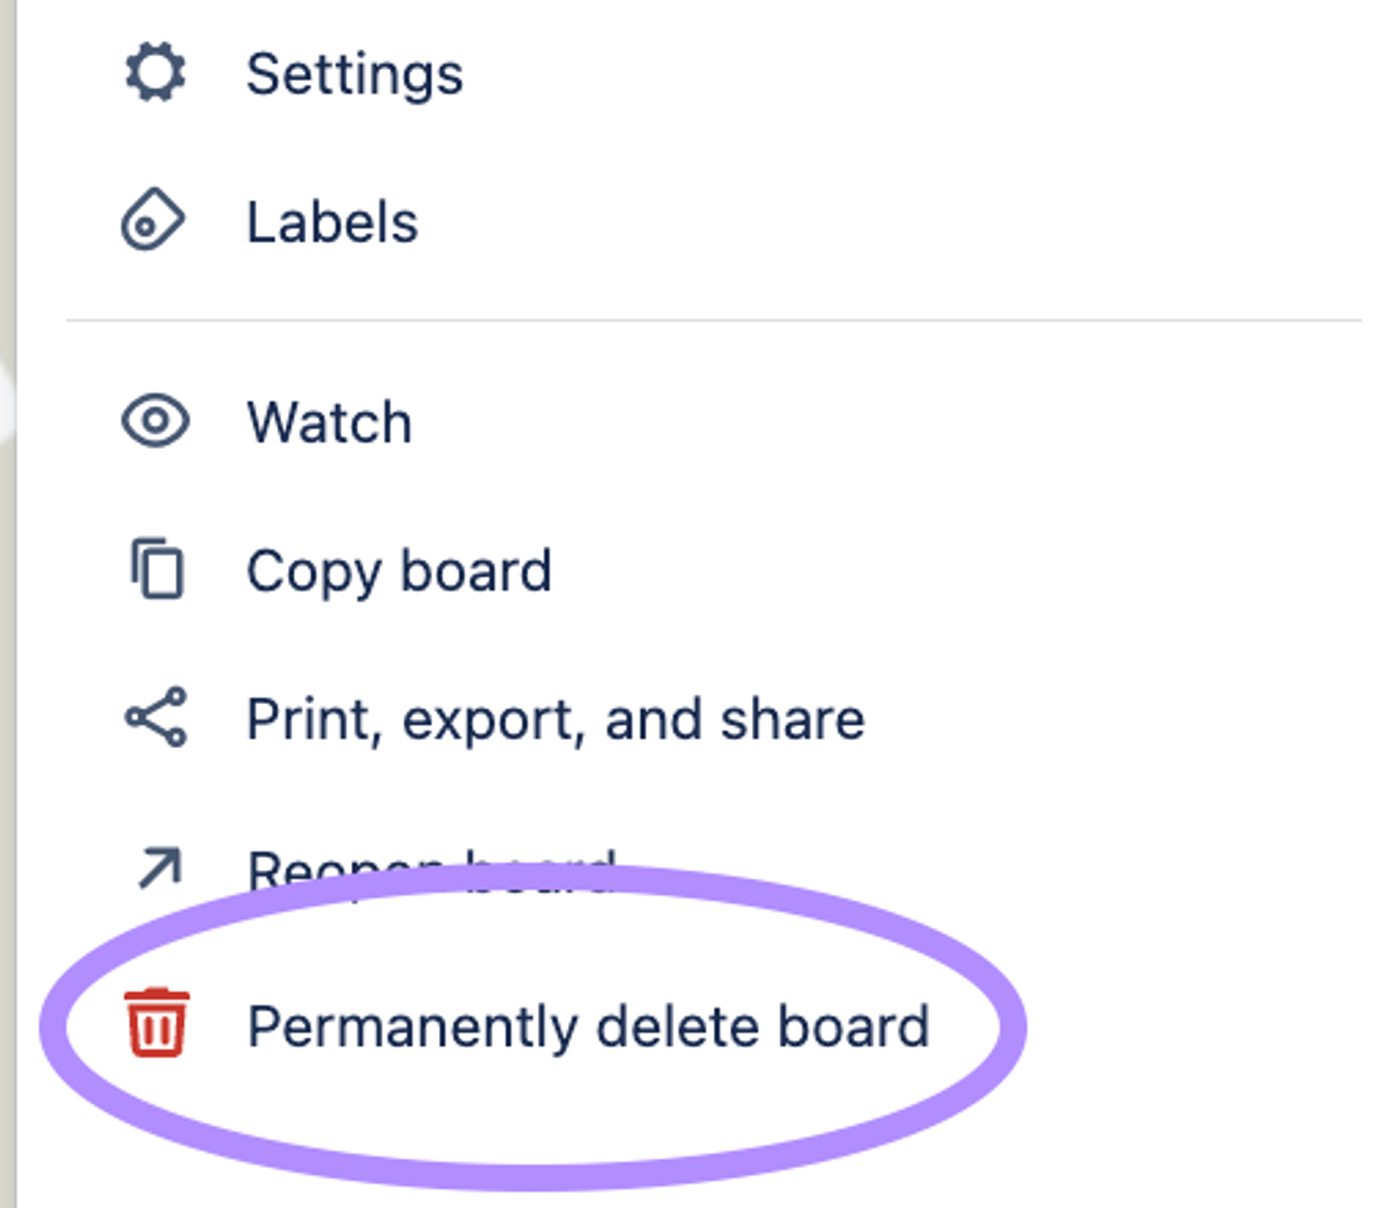 A screenshot showing the option to permanently delete a Trello board once closed